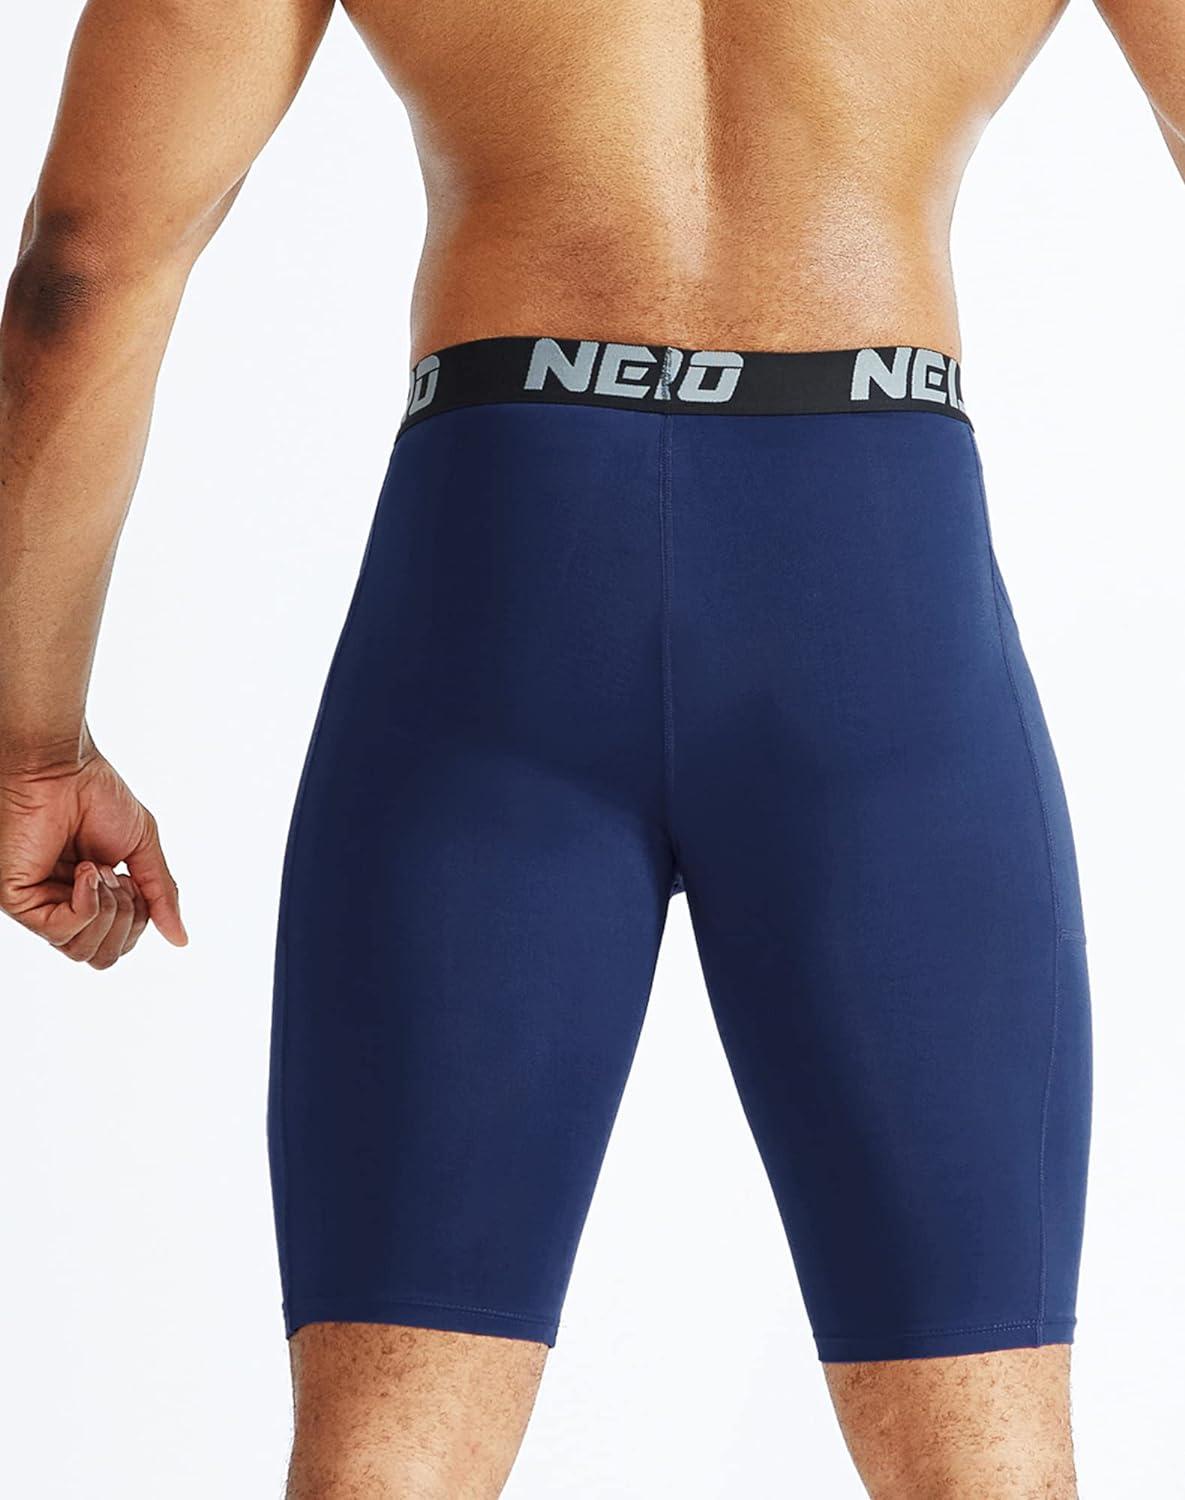 Buy Neleus Men's 2 Pack Compression Pants Sports Workout Running